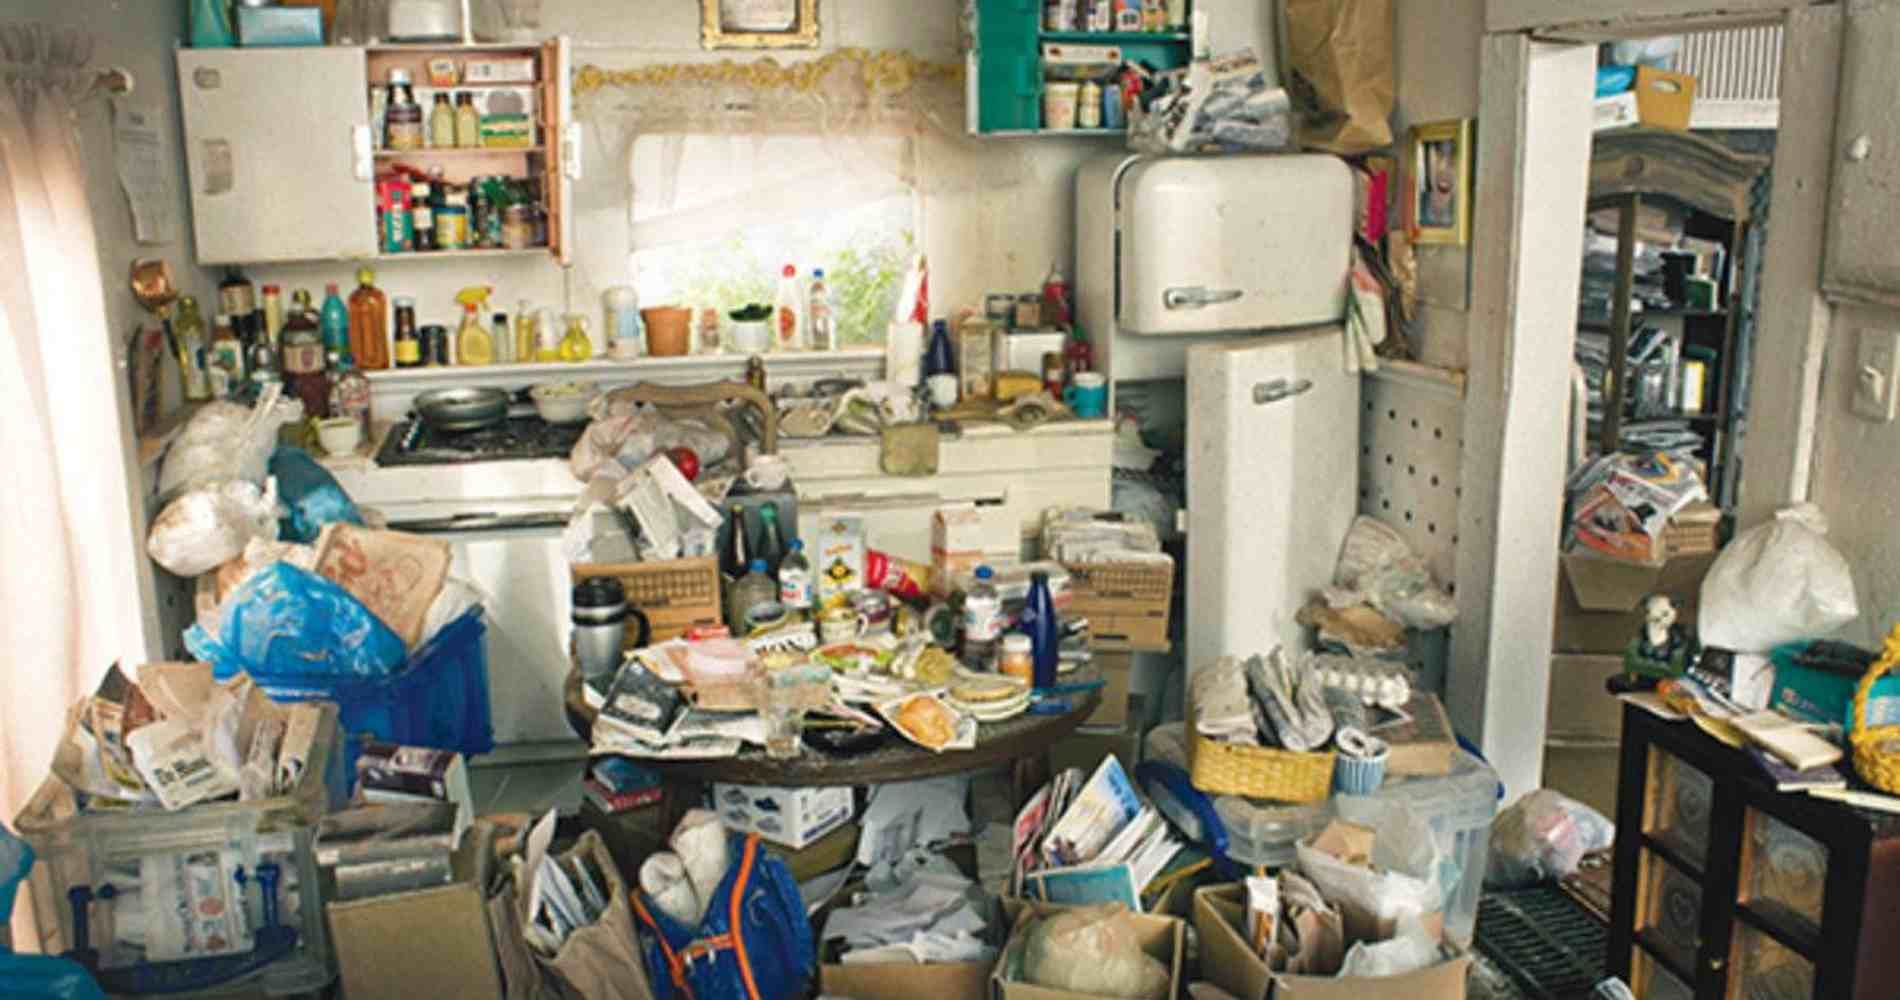 #1 for Hoarding Cleanup in Gilbert, AZ with Over 1200 5-Star Reviews!